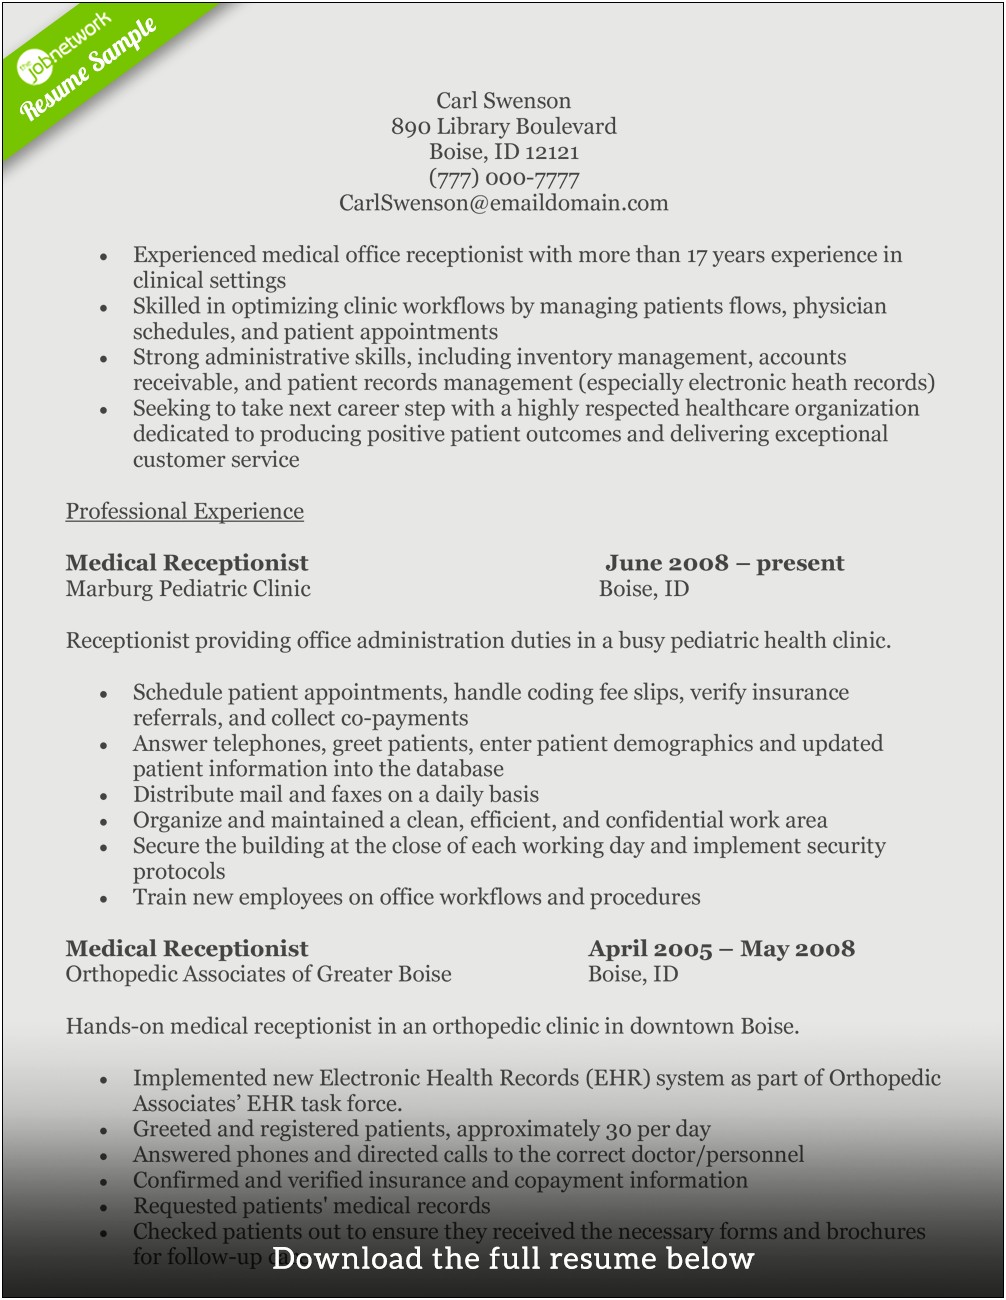 Summary For Resume For Medical Records Rep